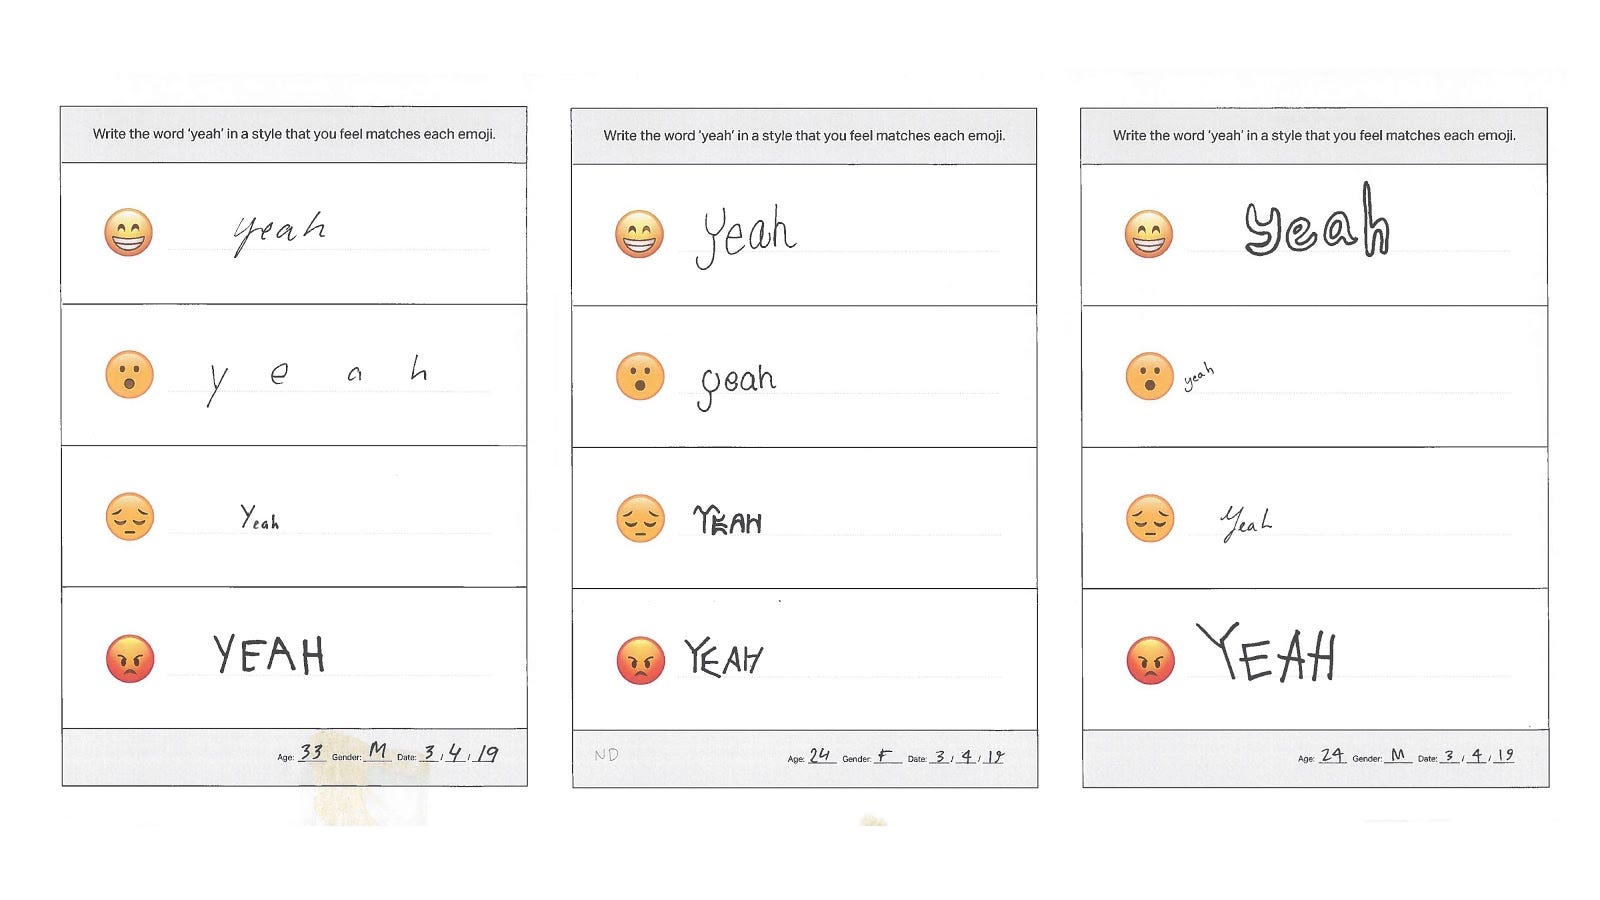 Three responses to a survey on how you would write text corresponding to emojis: happy, surprised, sad, and angry.